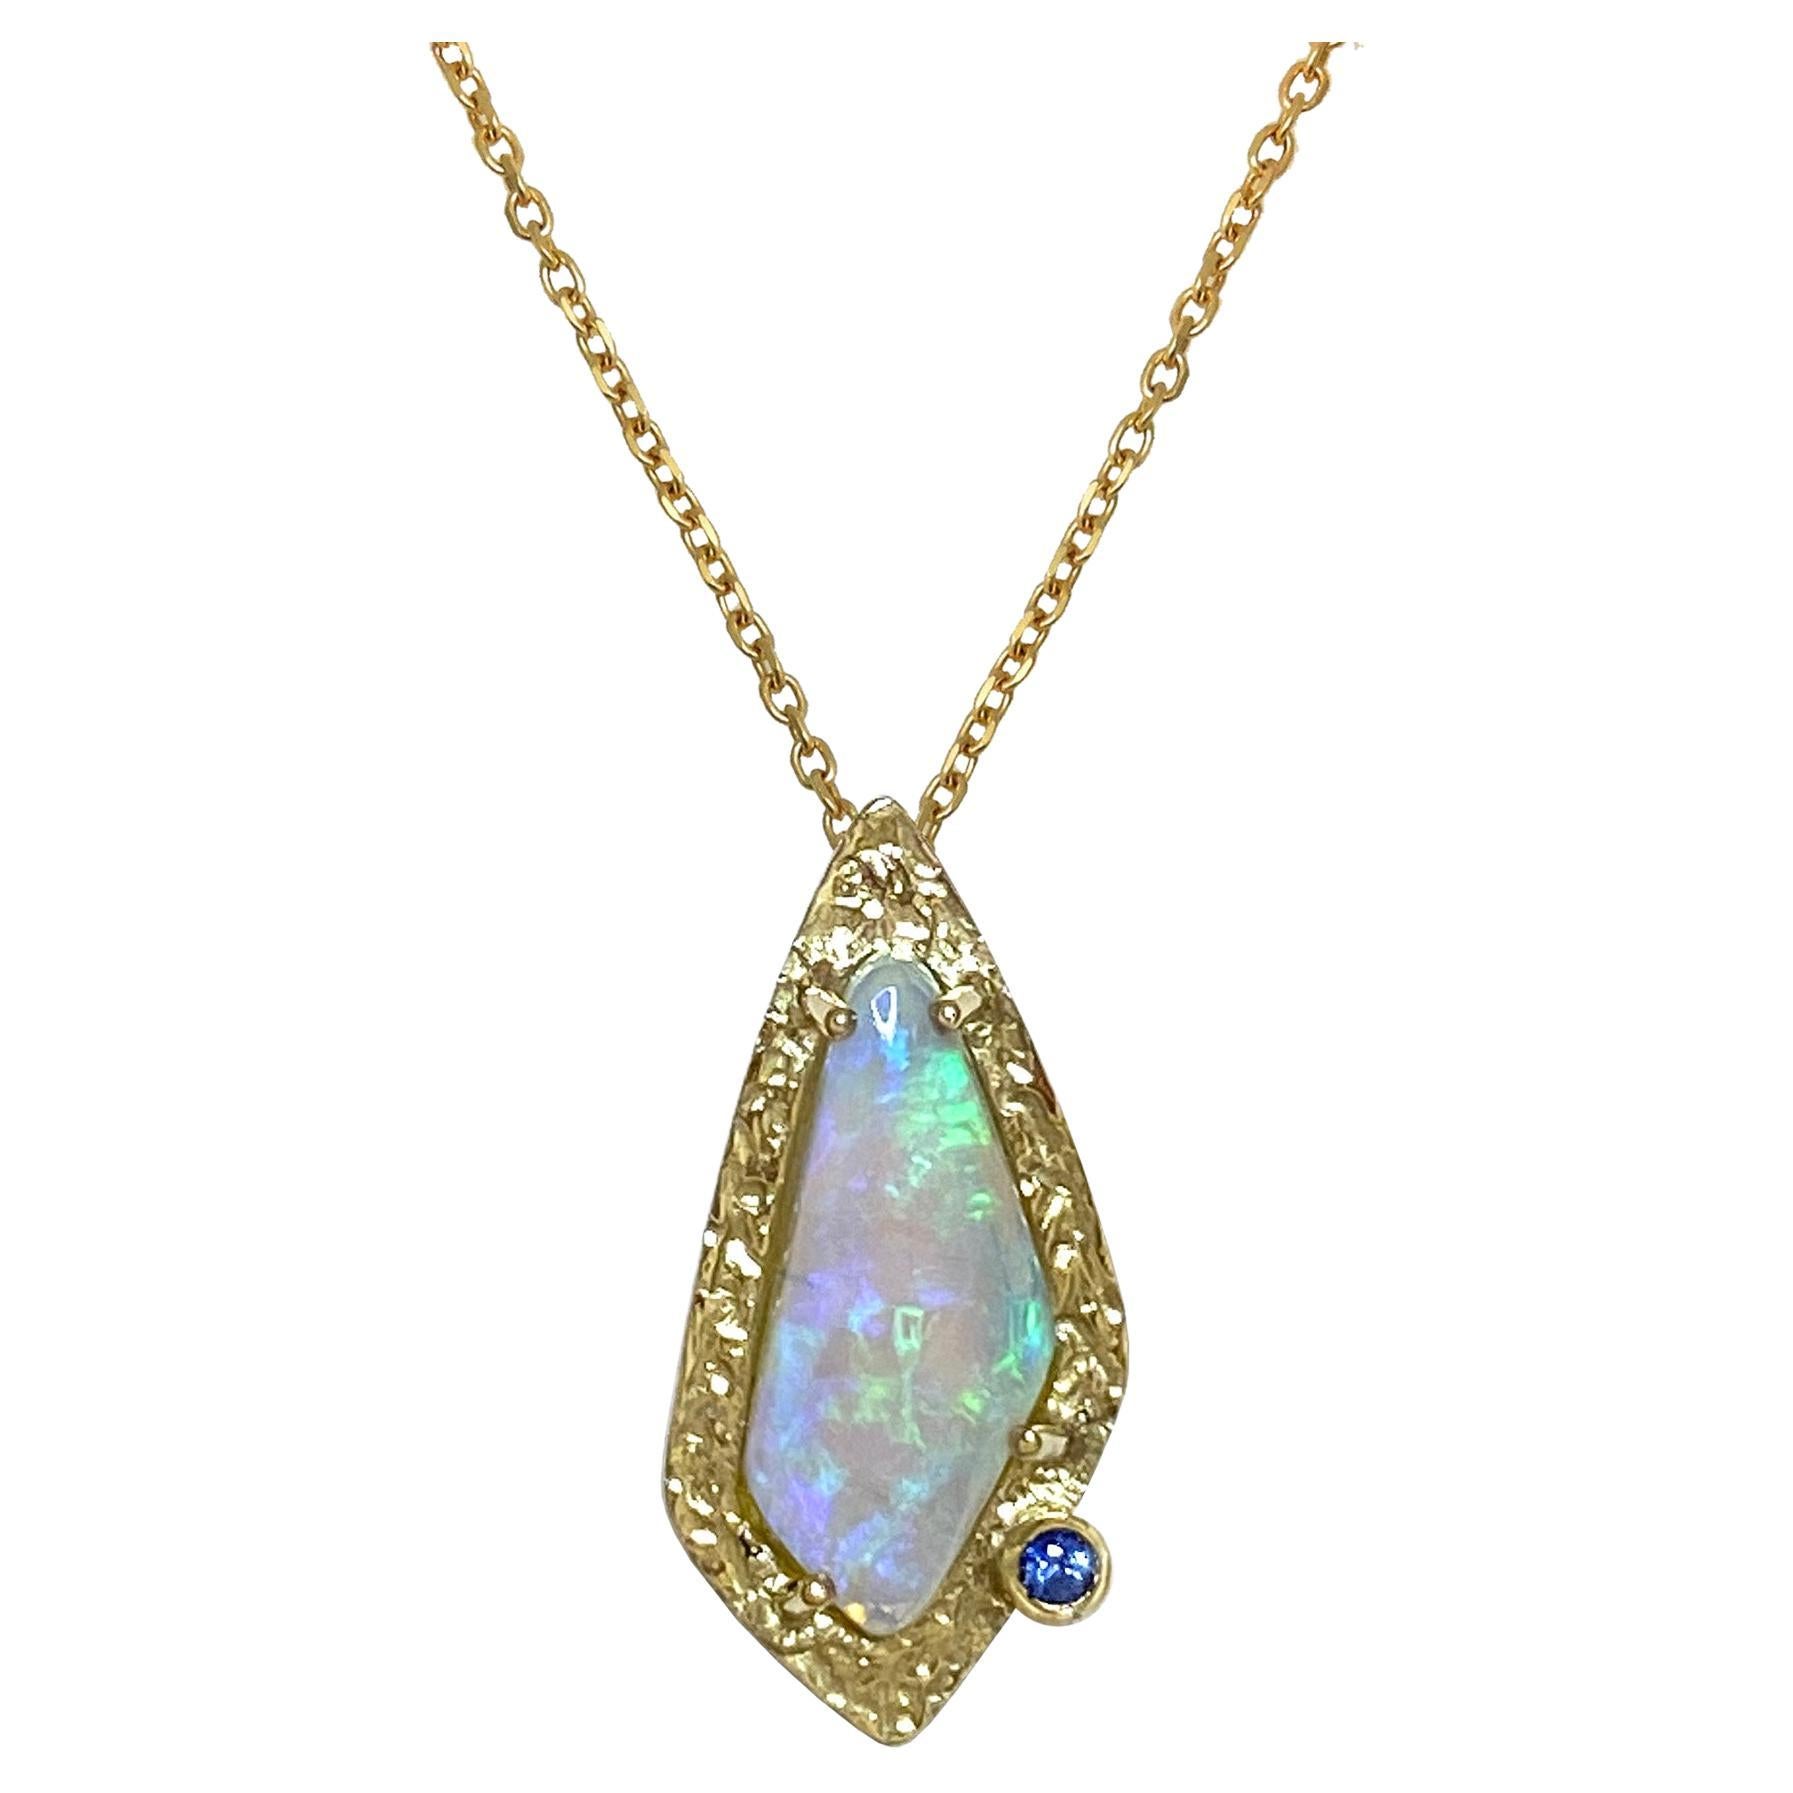 Keiko Mita's Opal Azure Necklace in a Gold Frame with Blue Sapphire Accents